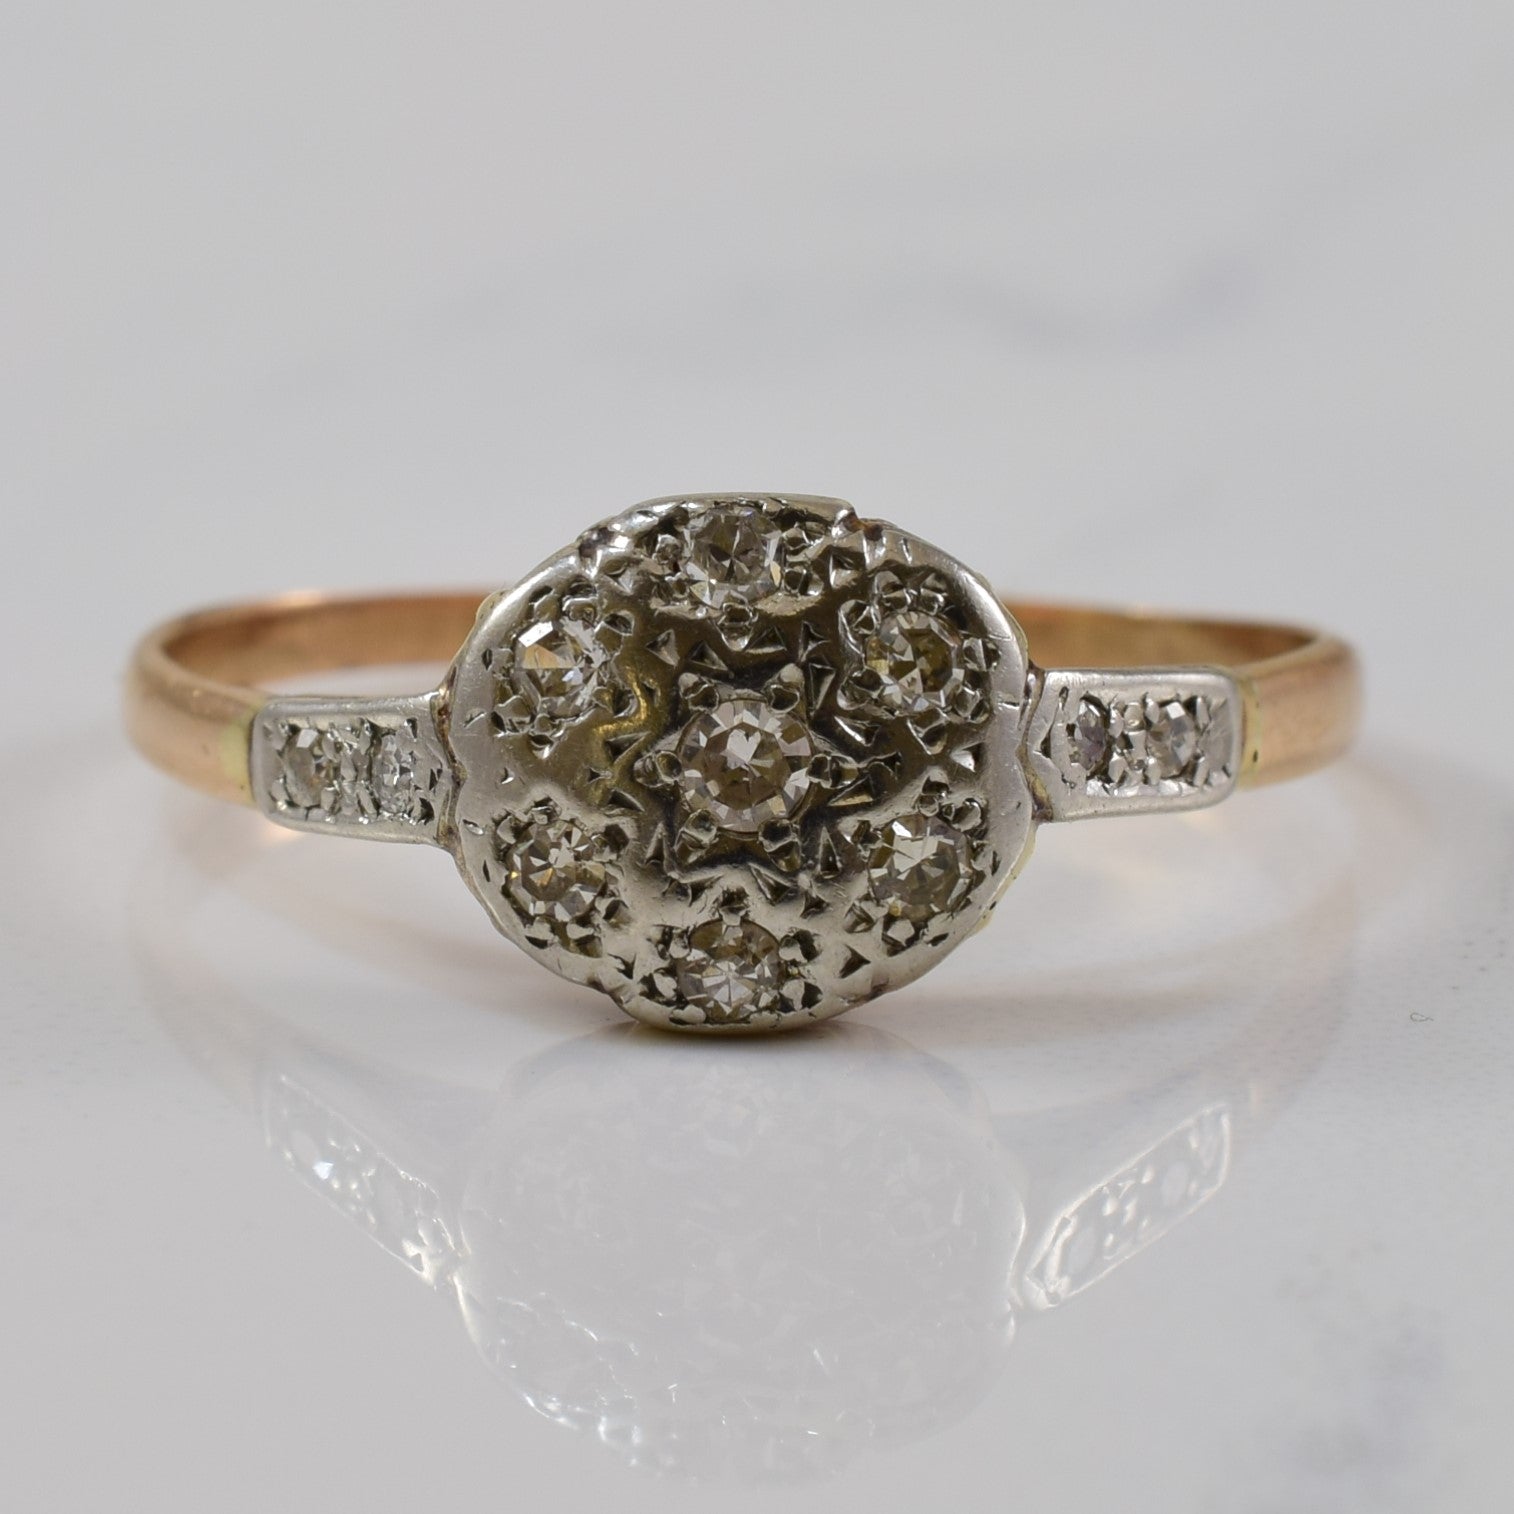 Early 1900s Diamond Cluster Ring | 0.16ctw | SZ 7.75 |